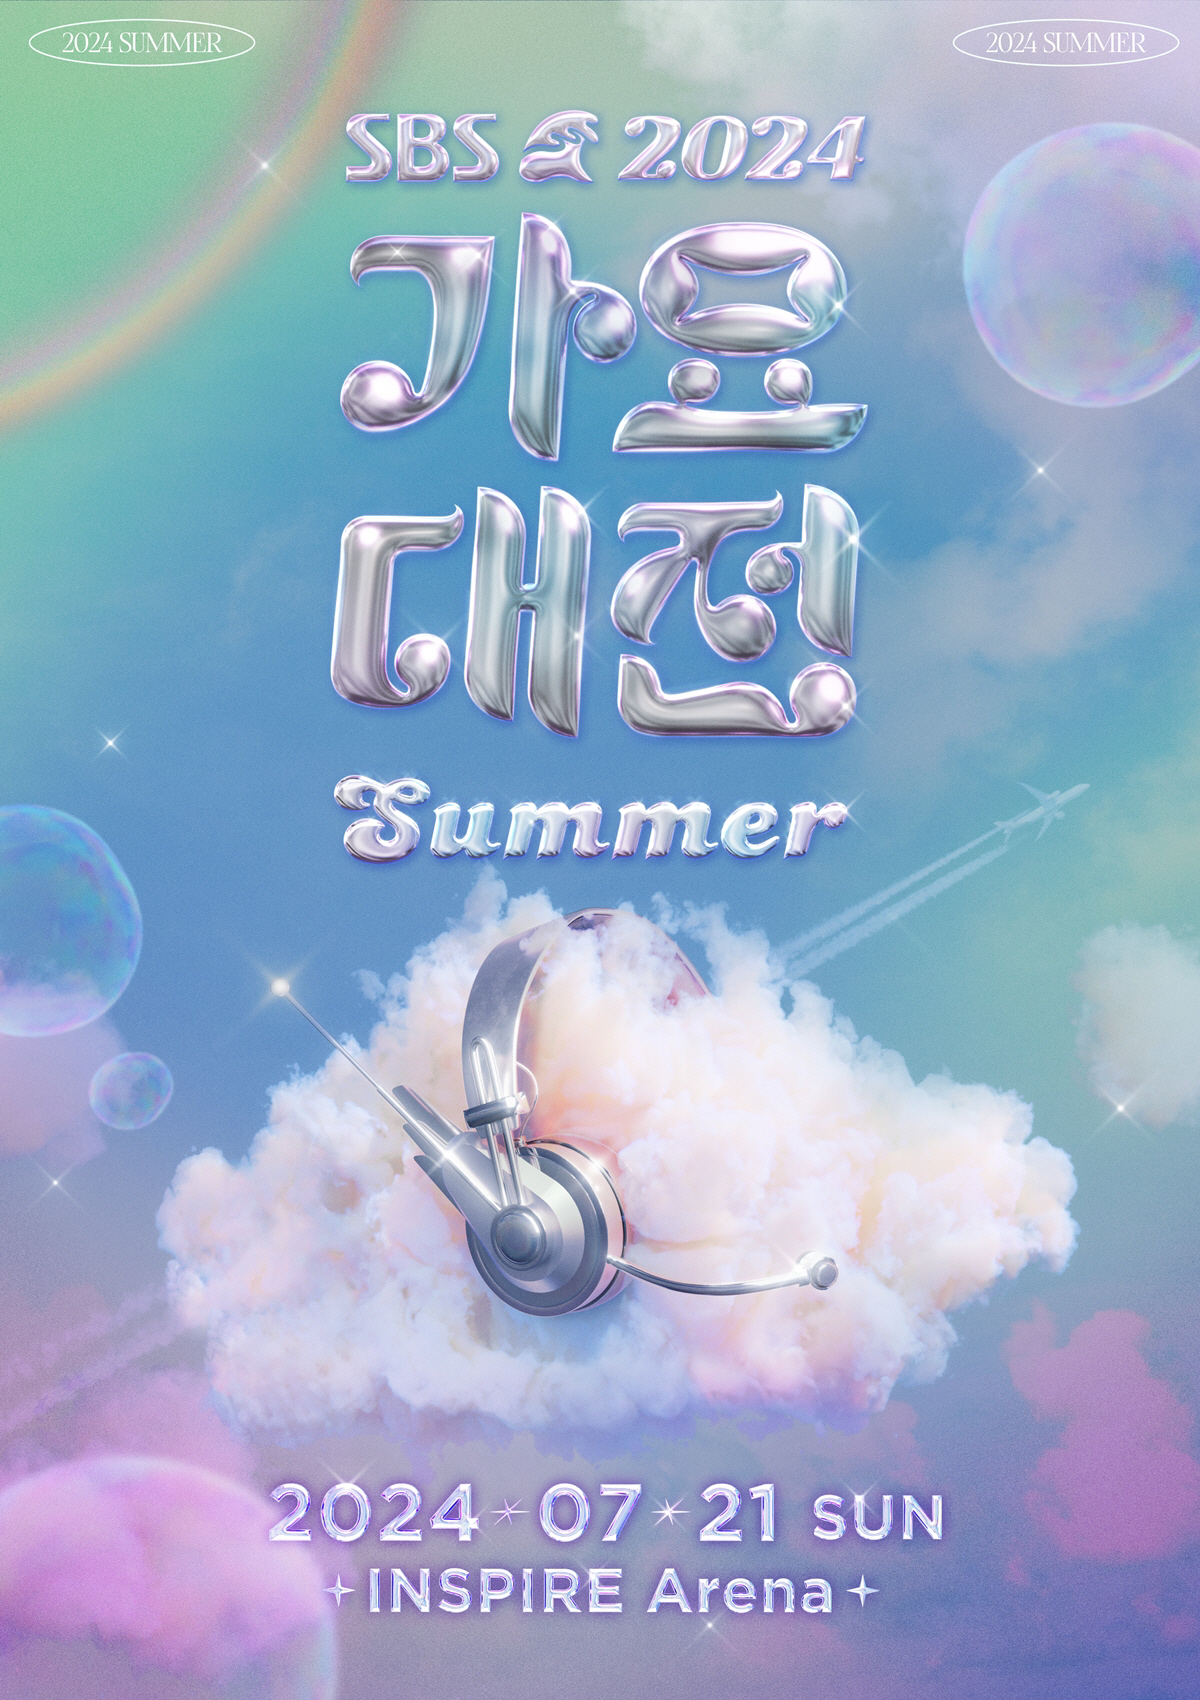 SBS Gayo Daejeon Announces First-Ever Summer Edition + First Lineup Of Performers